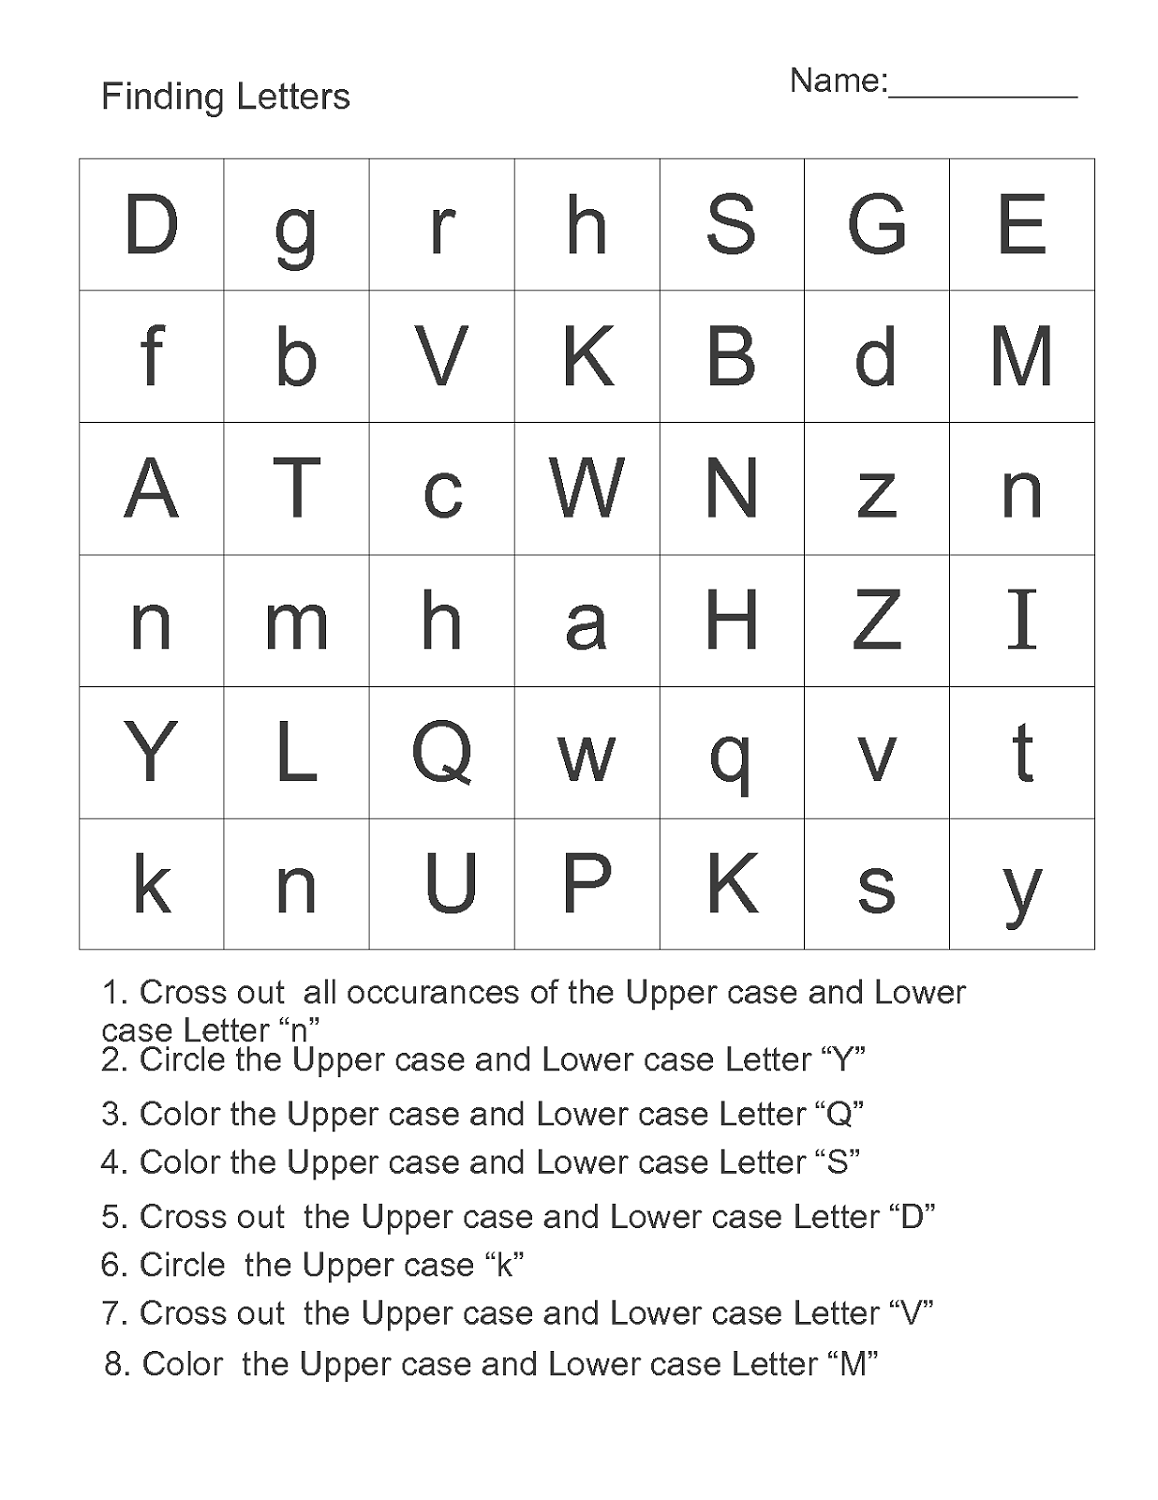 7-best-images-of-free-printable-tracing-letters-traceable-letter-worksheets-to-print-activity